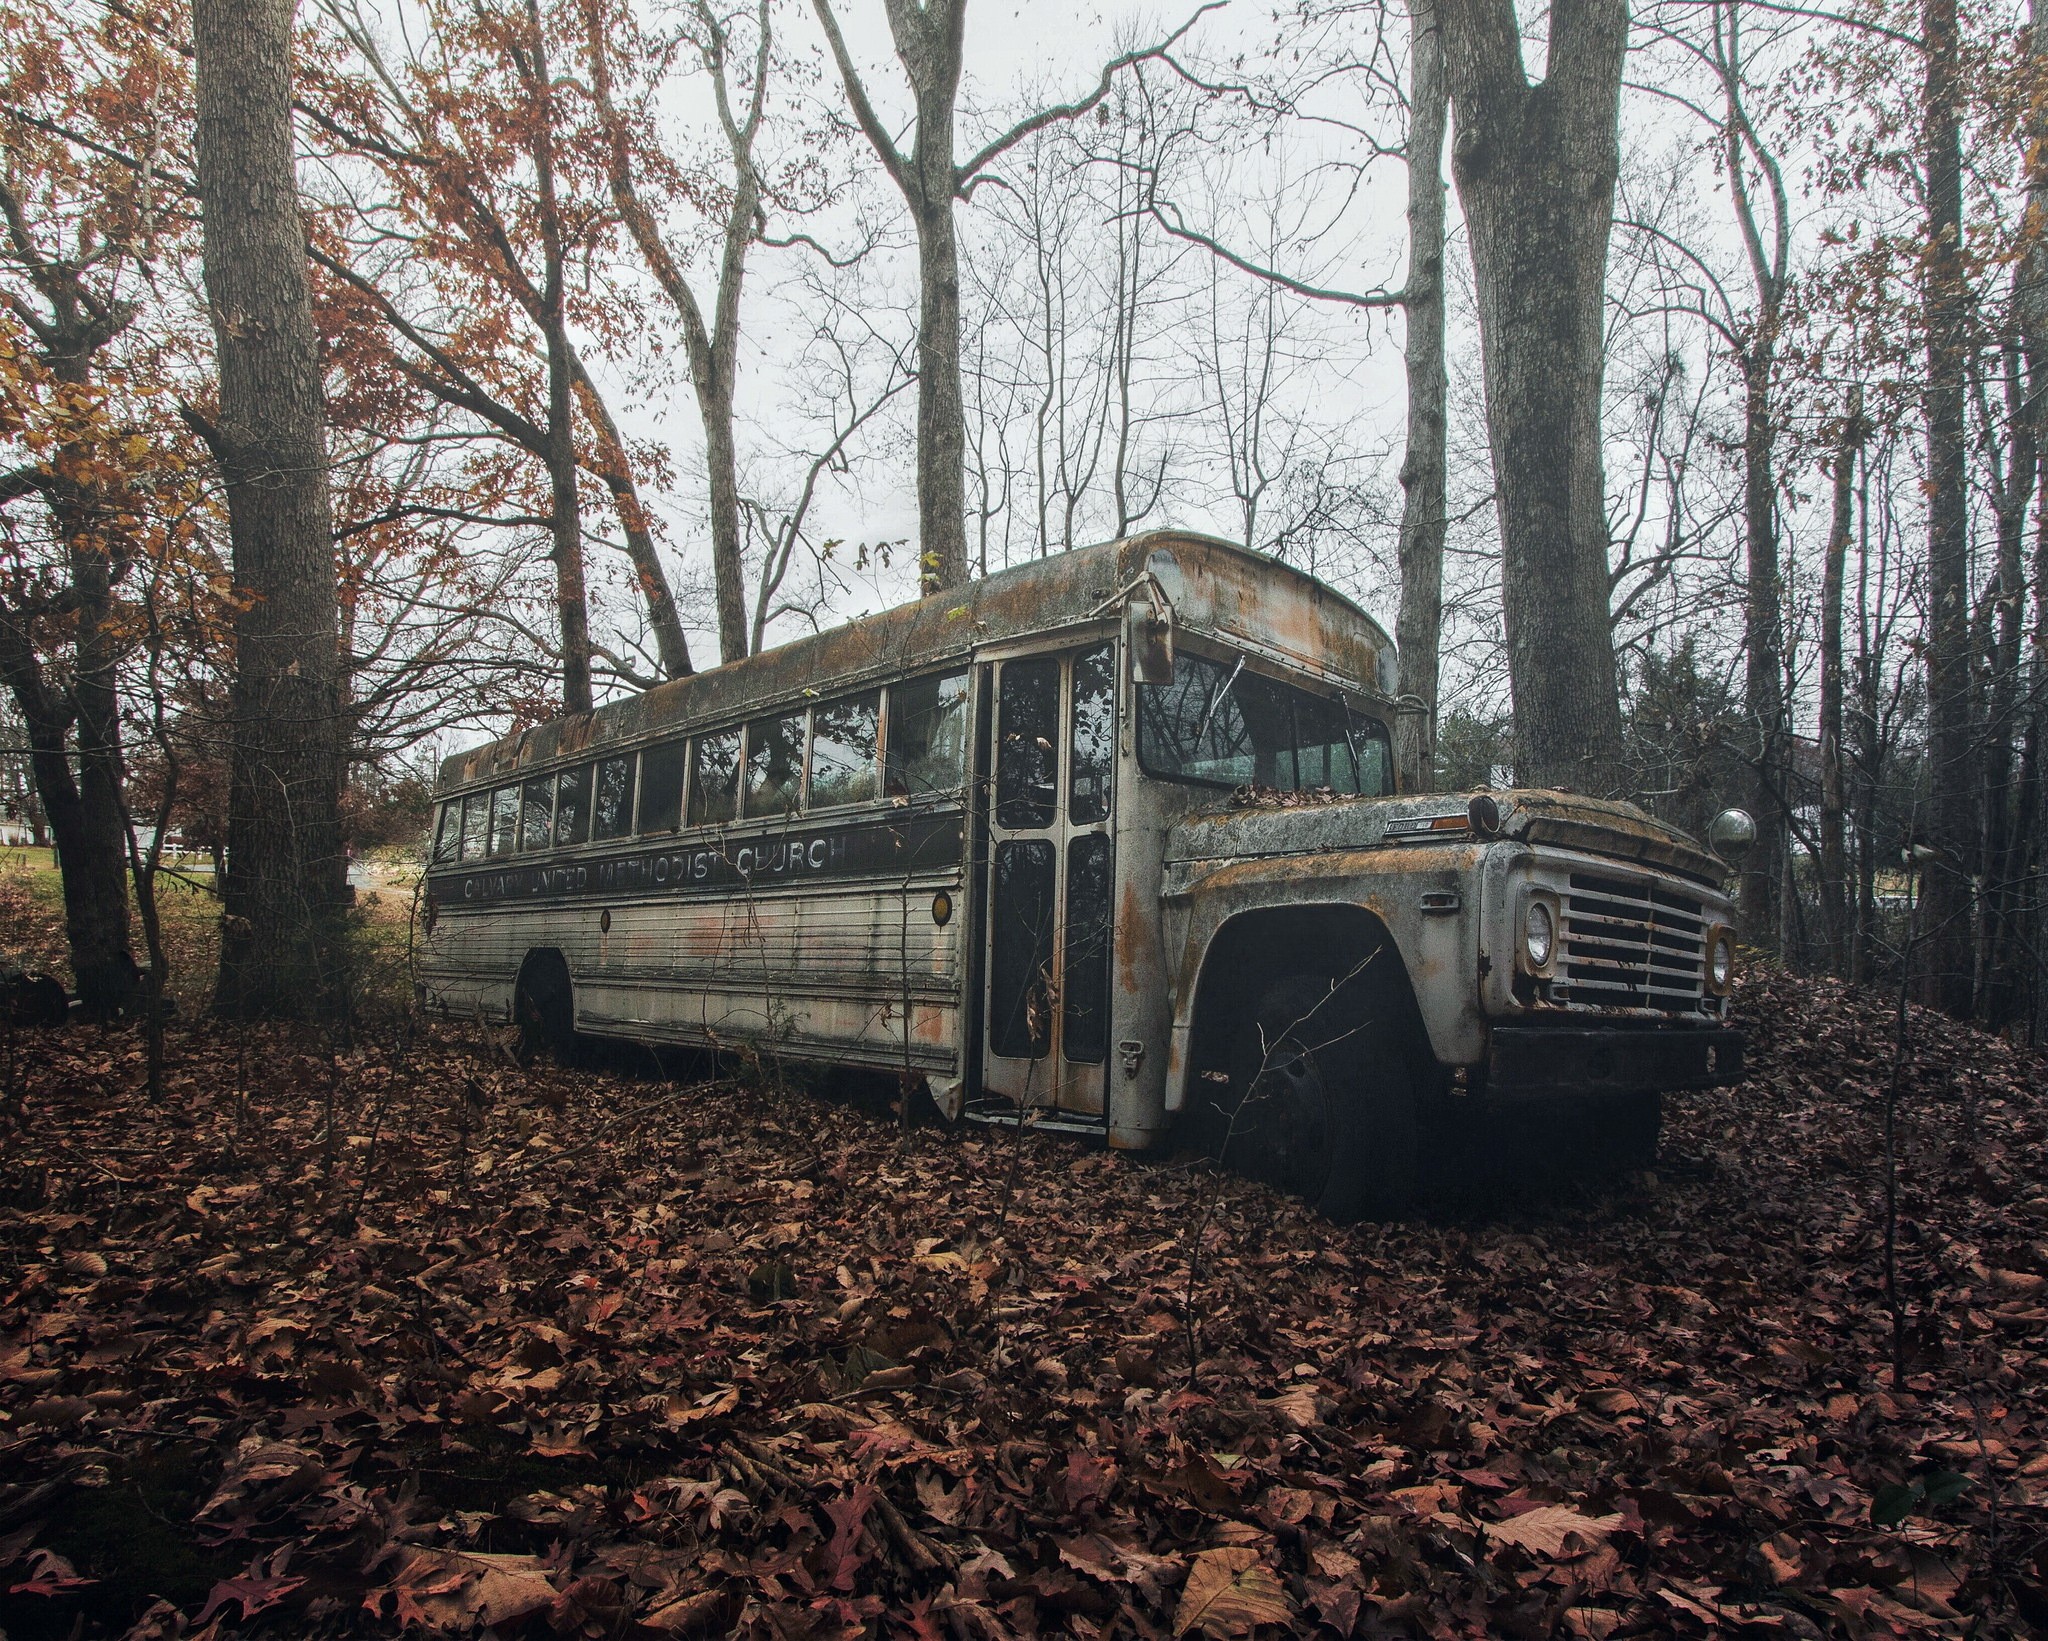 General 2048x1641 buses wreck vehicle abandoned fallen leaves trees outdoors